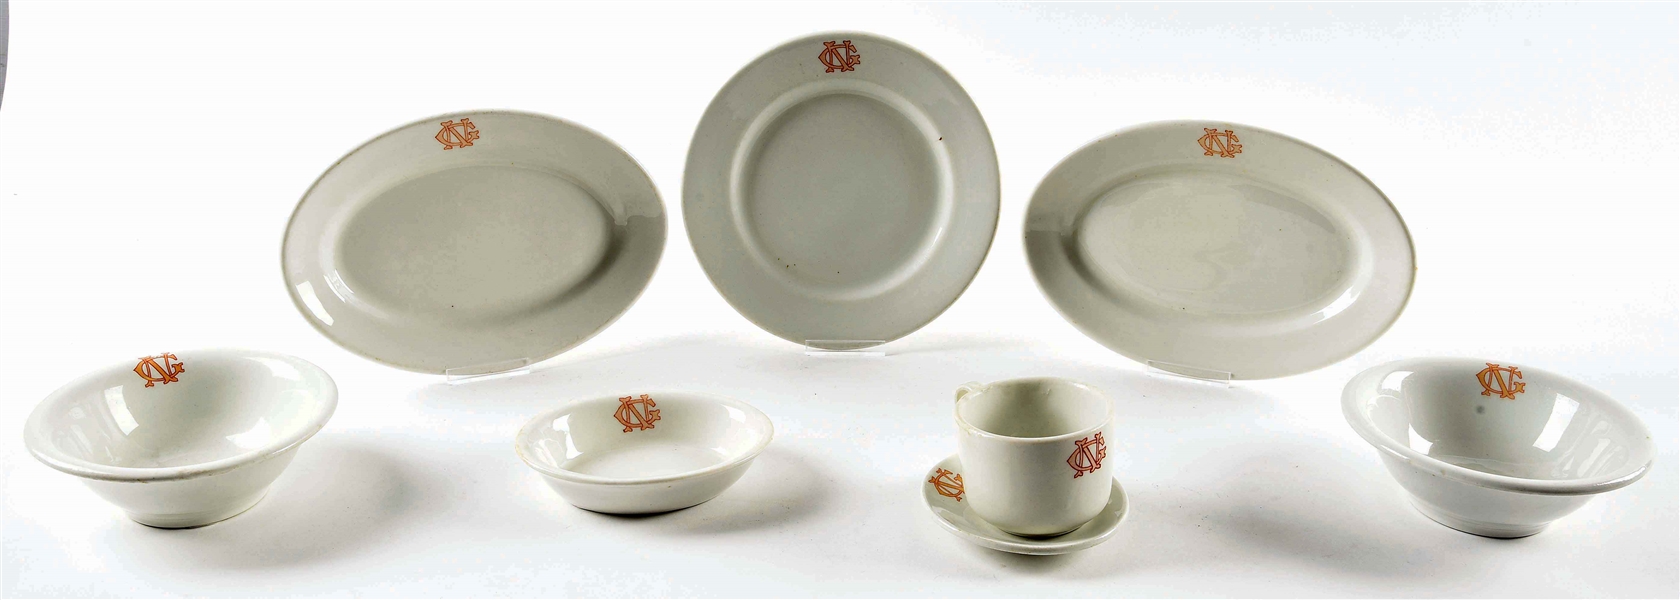 LOT OF 8: GREAT NORTHERN "HILL" PATTERN CHINA PIECES PLUS MENU.